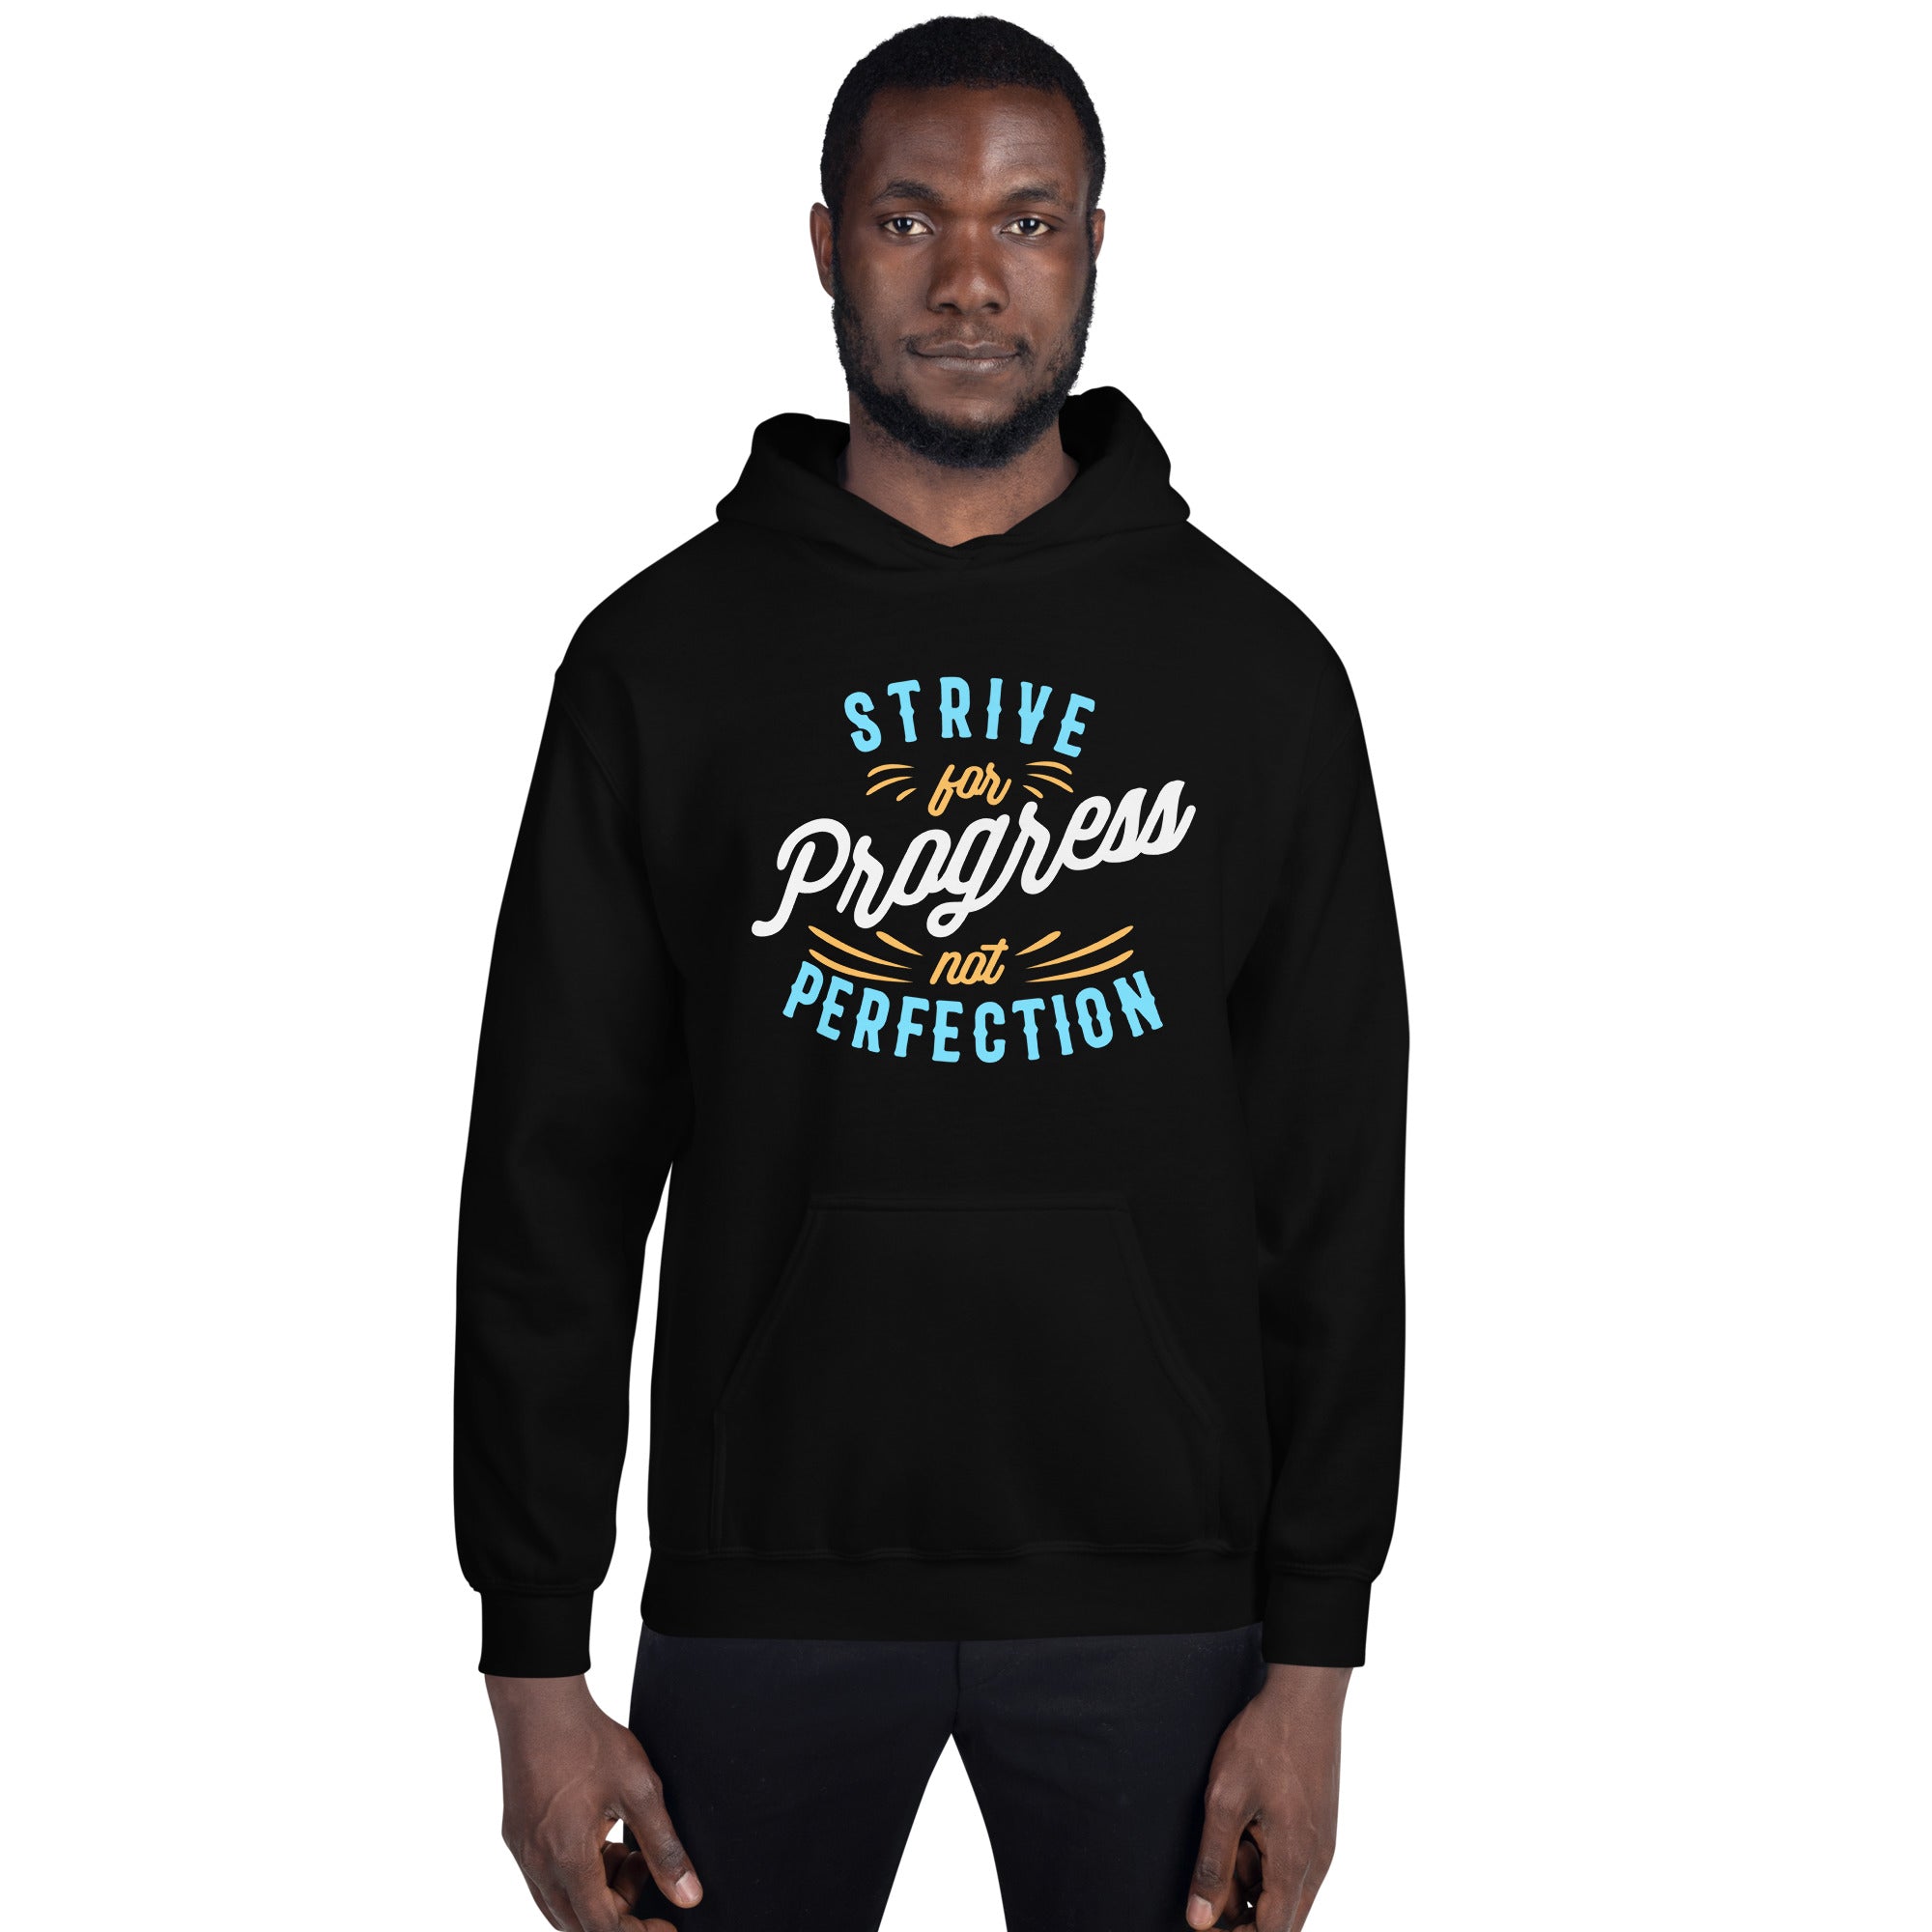 Strive For Progress, Not Perfection - Unisex Hoodie